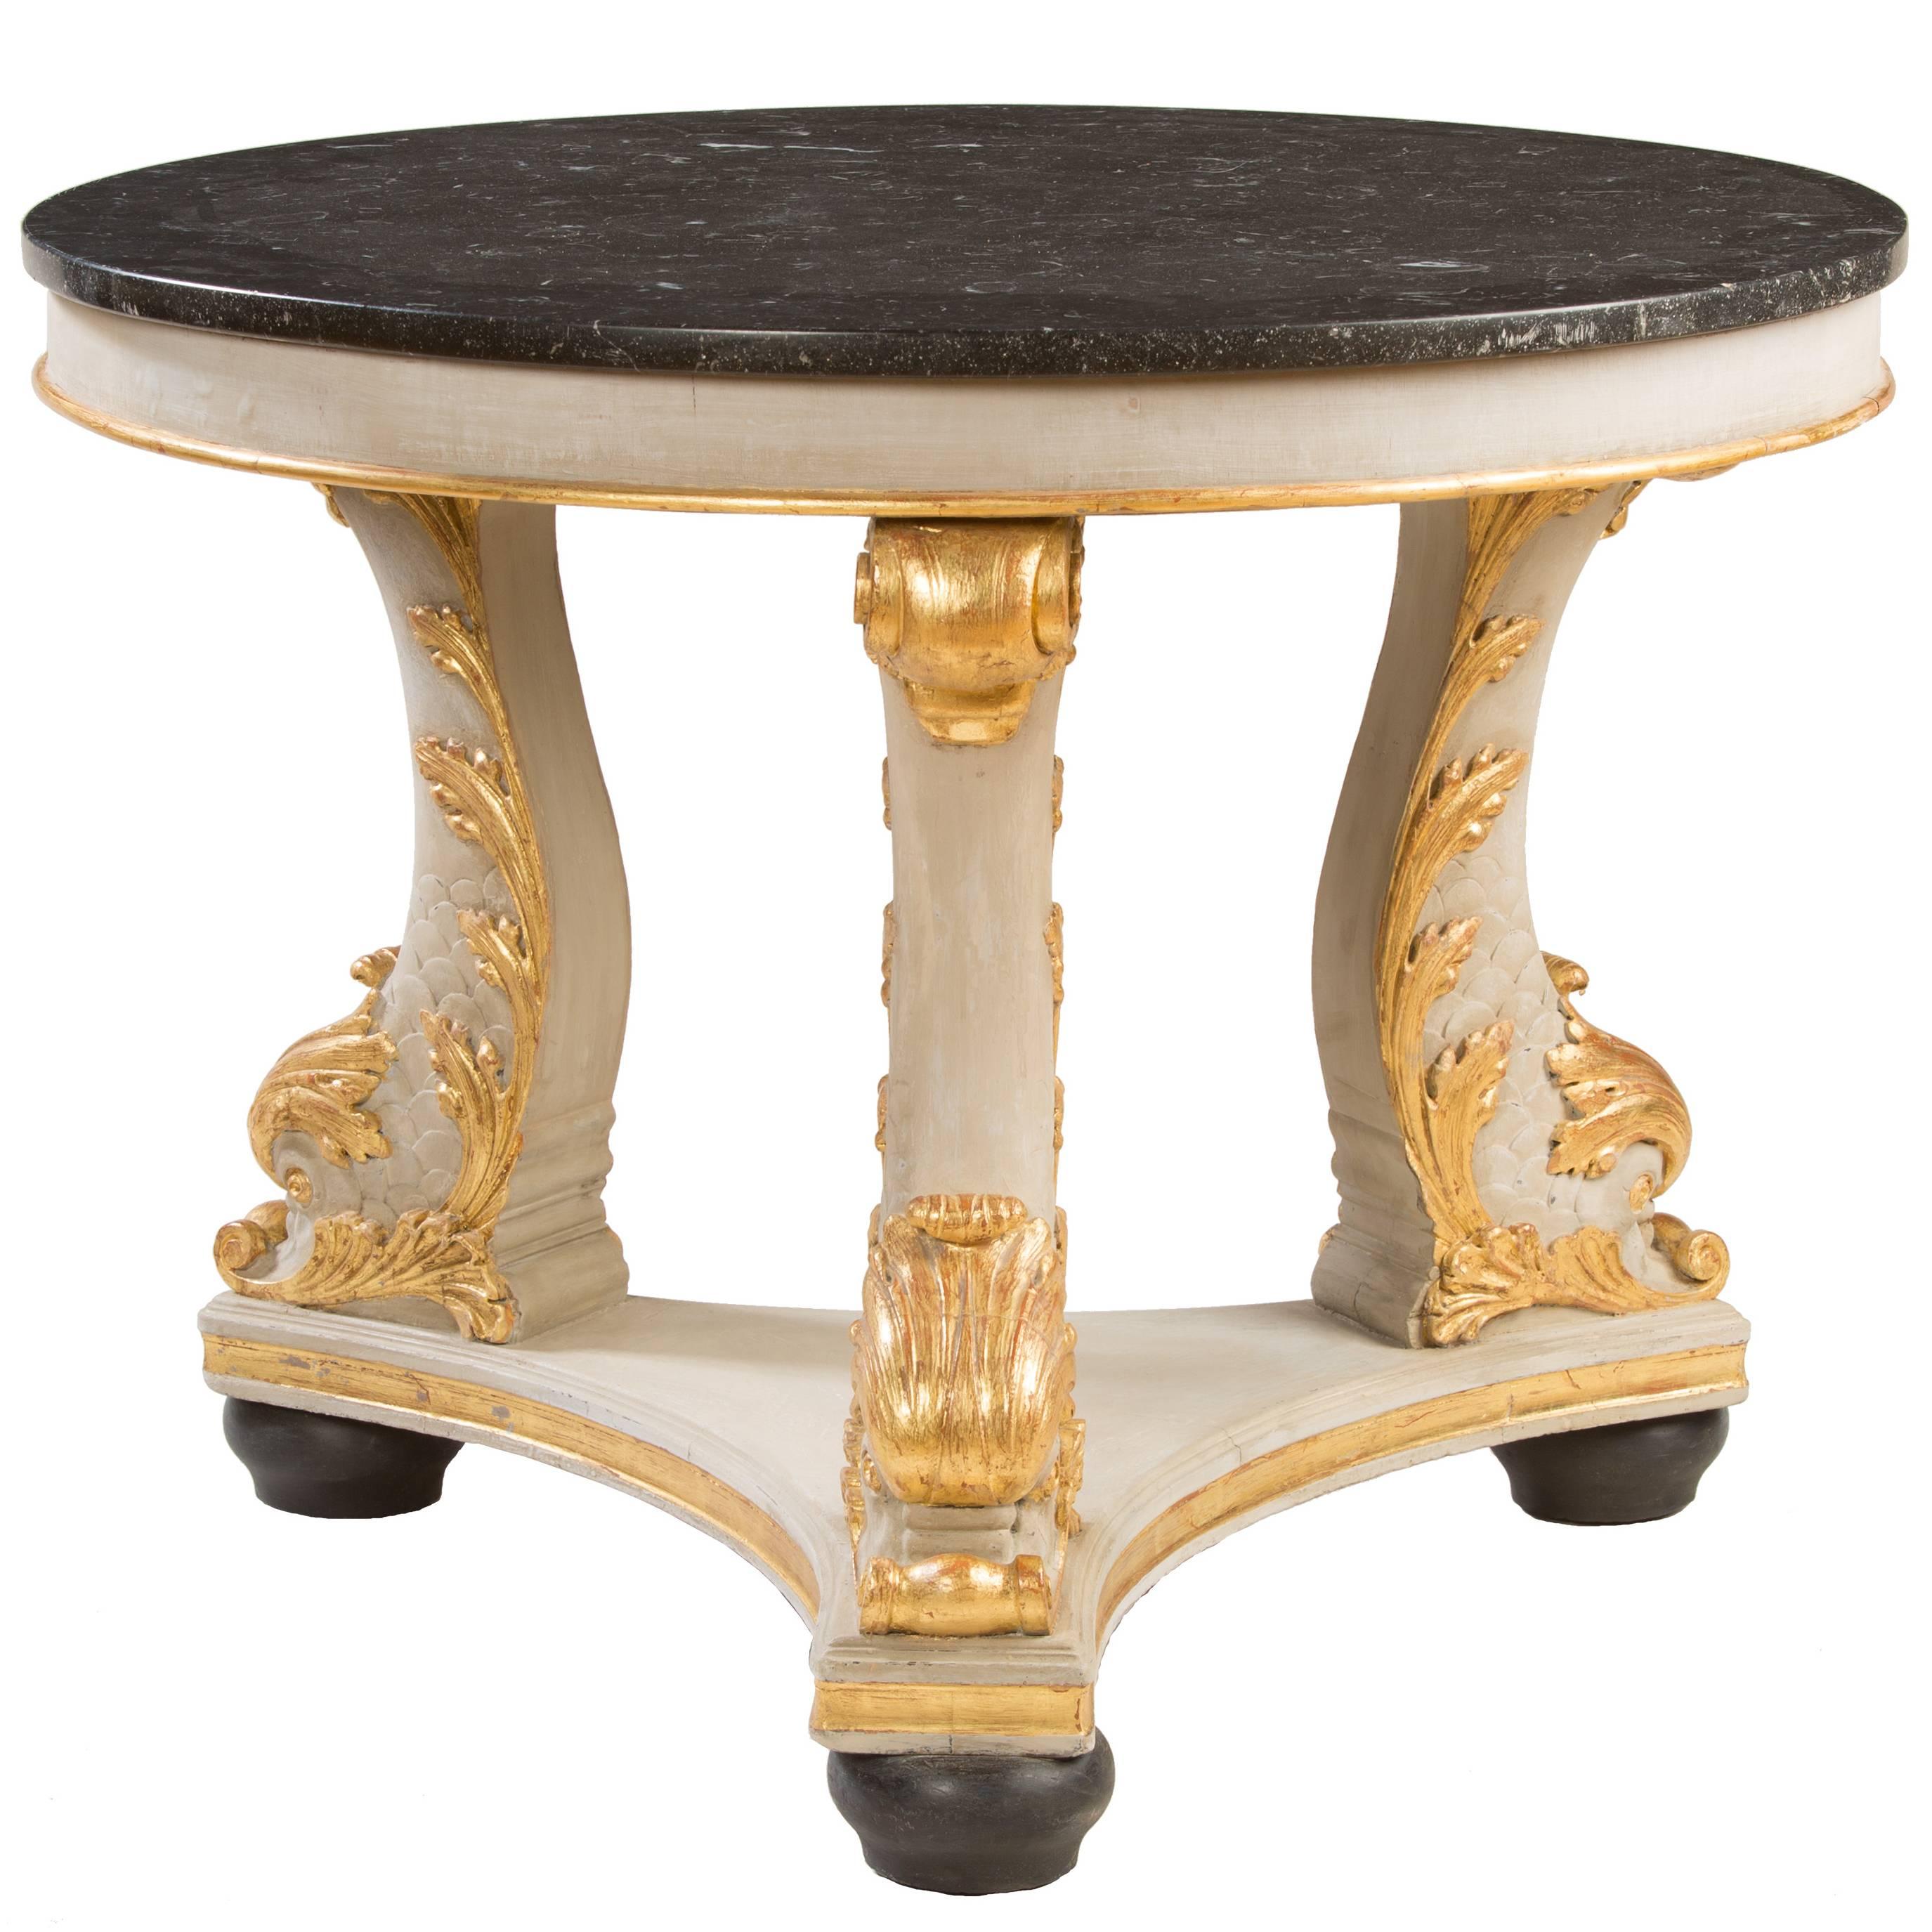 19th Century Neoclassical Marble-Top Painted and Parcel-Gilt Center Table For Sale